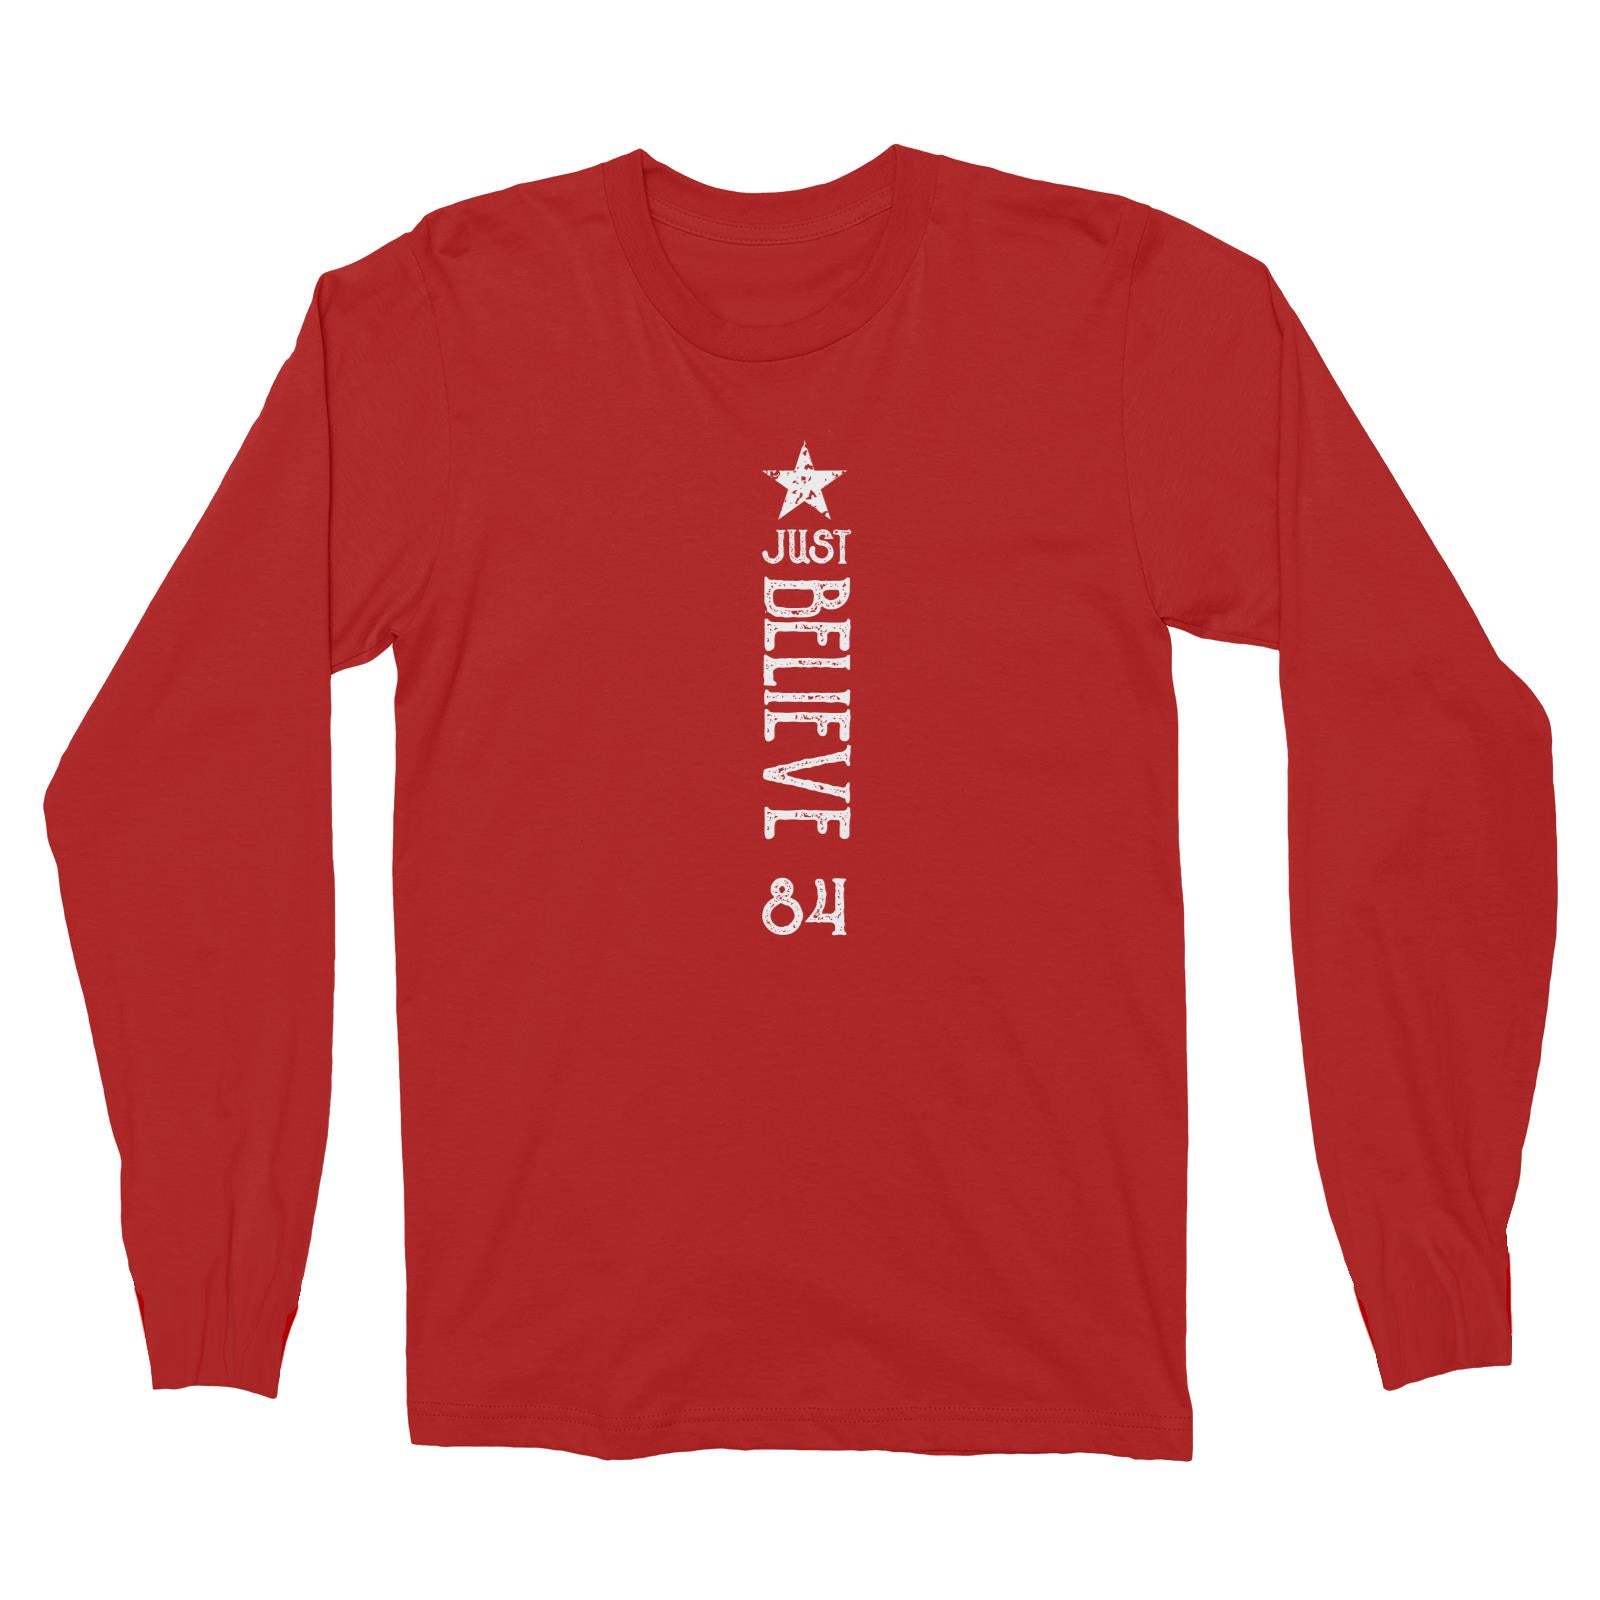 Just Believe Personalizable with Name and Number Long Sleeve Unisex T-Shirt